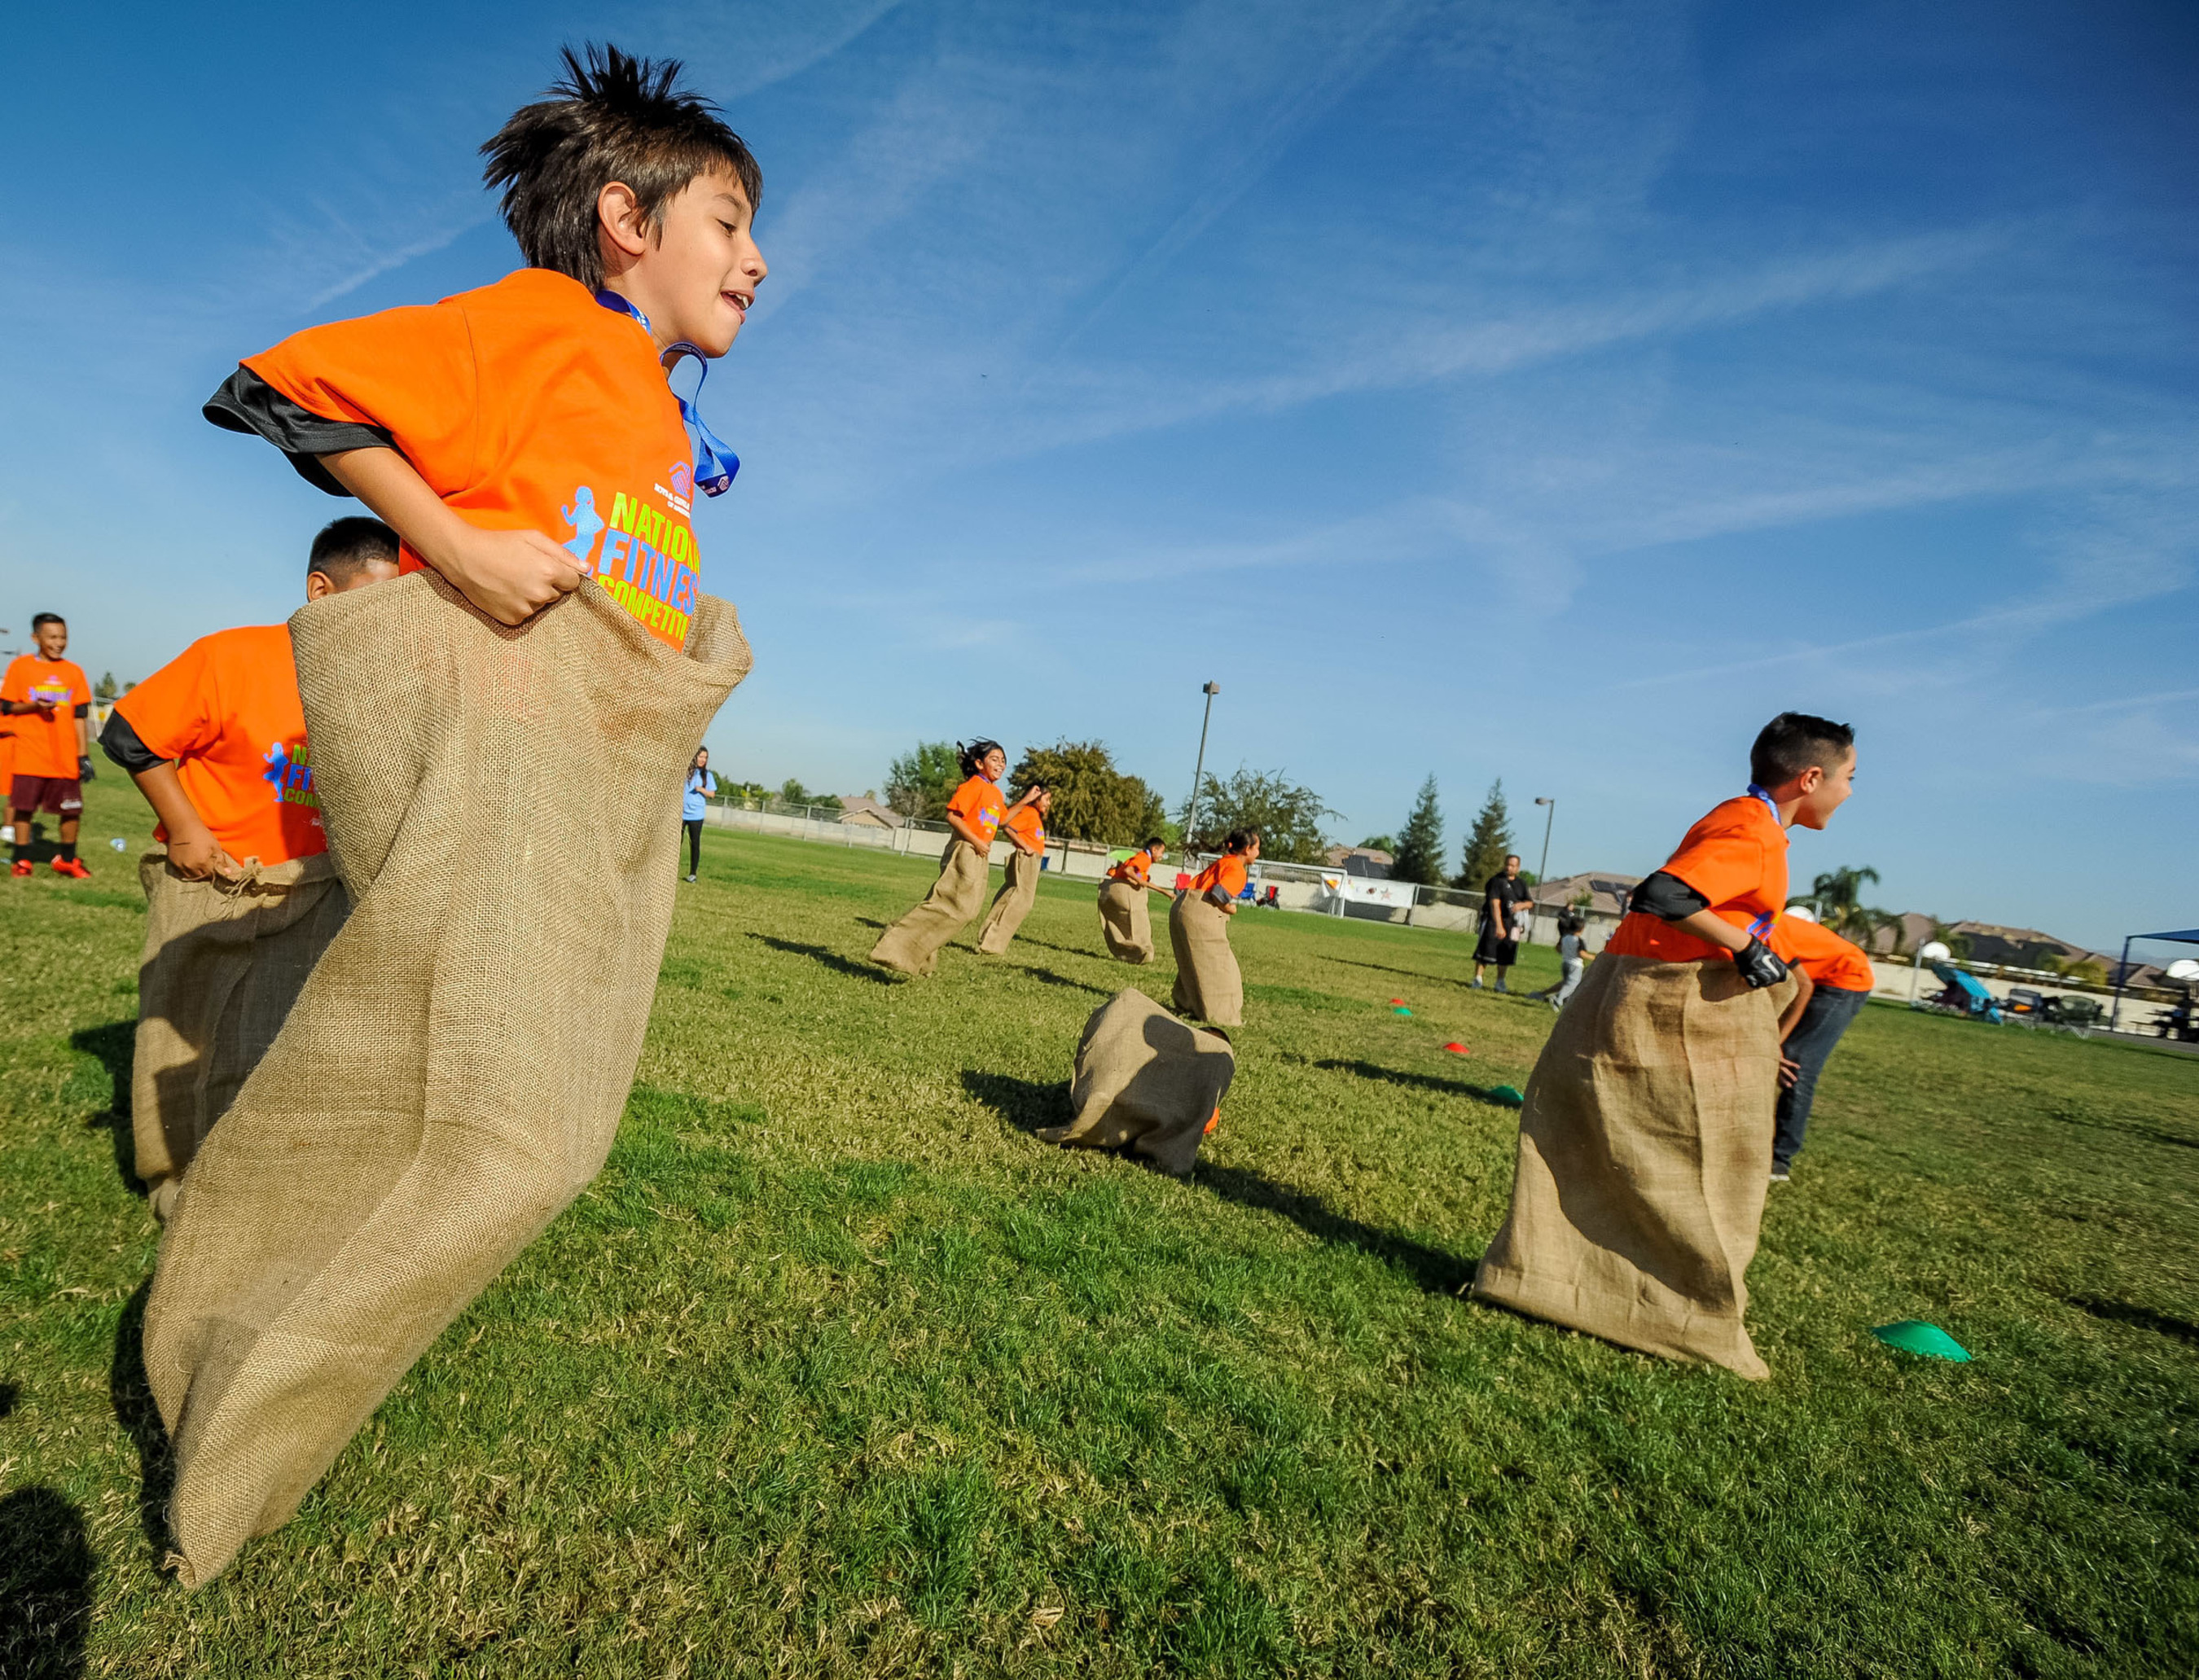 Youth from Boys & Girls Clubs of of Kern County participate in sack races during Boys & Girls Clubs of America and Nestle's National Fitness Competition in Bakersfield, California.